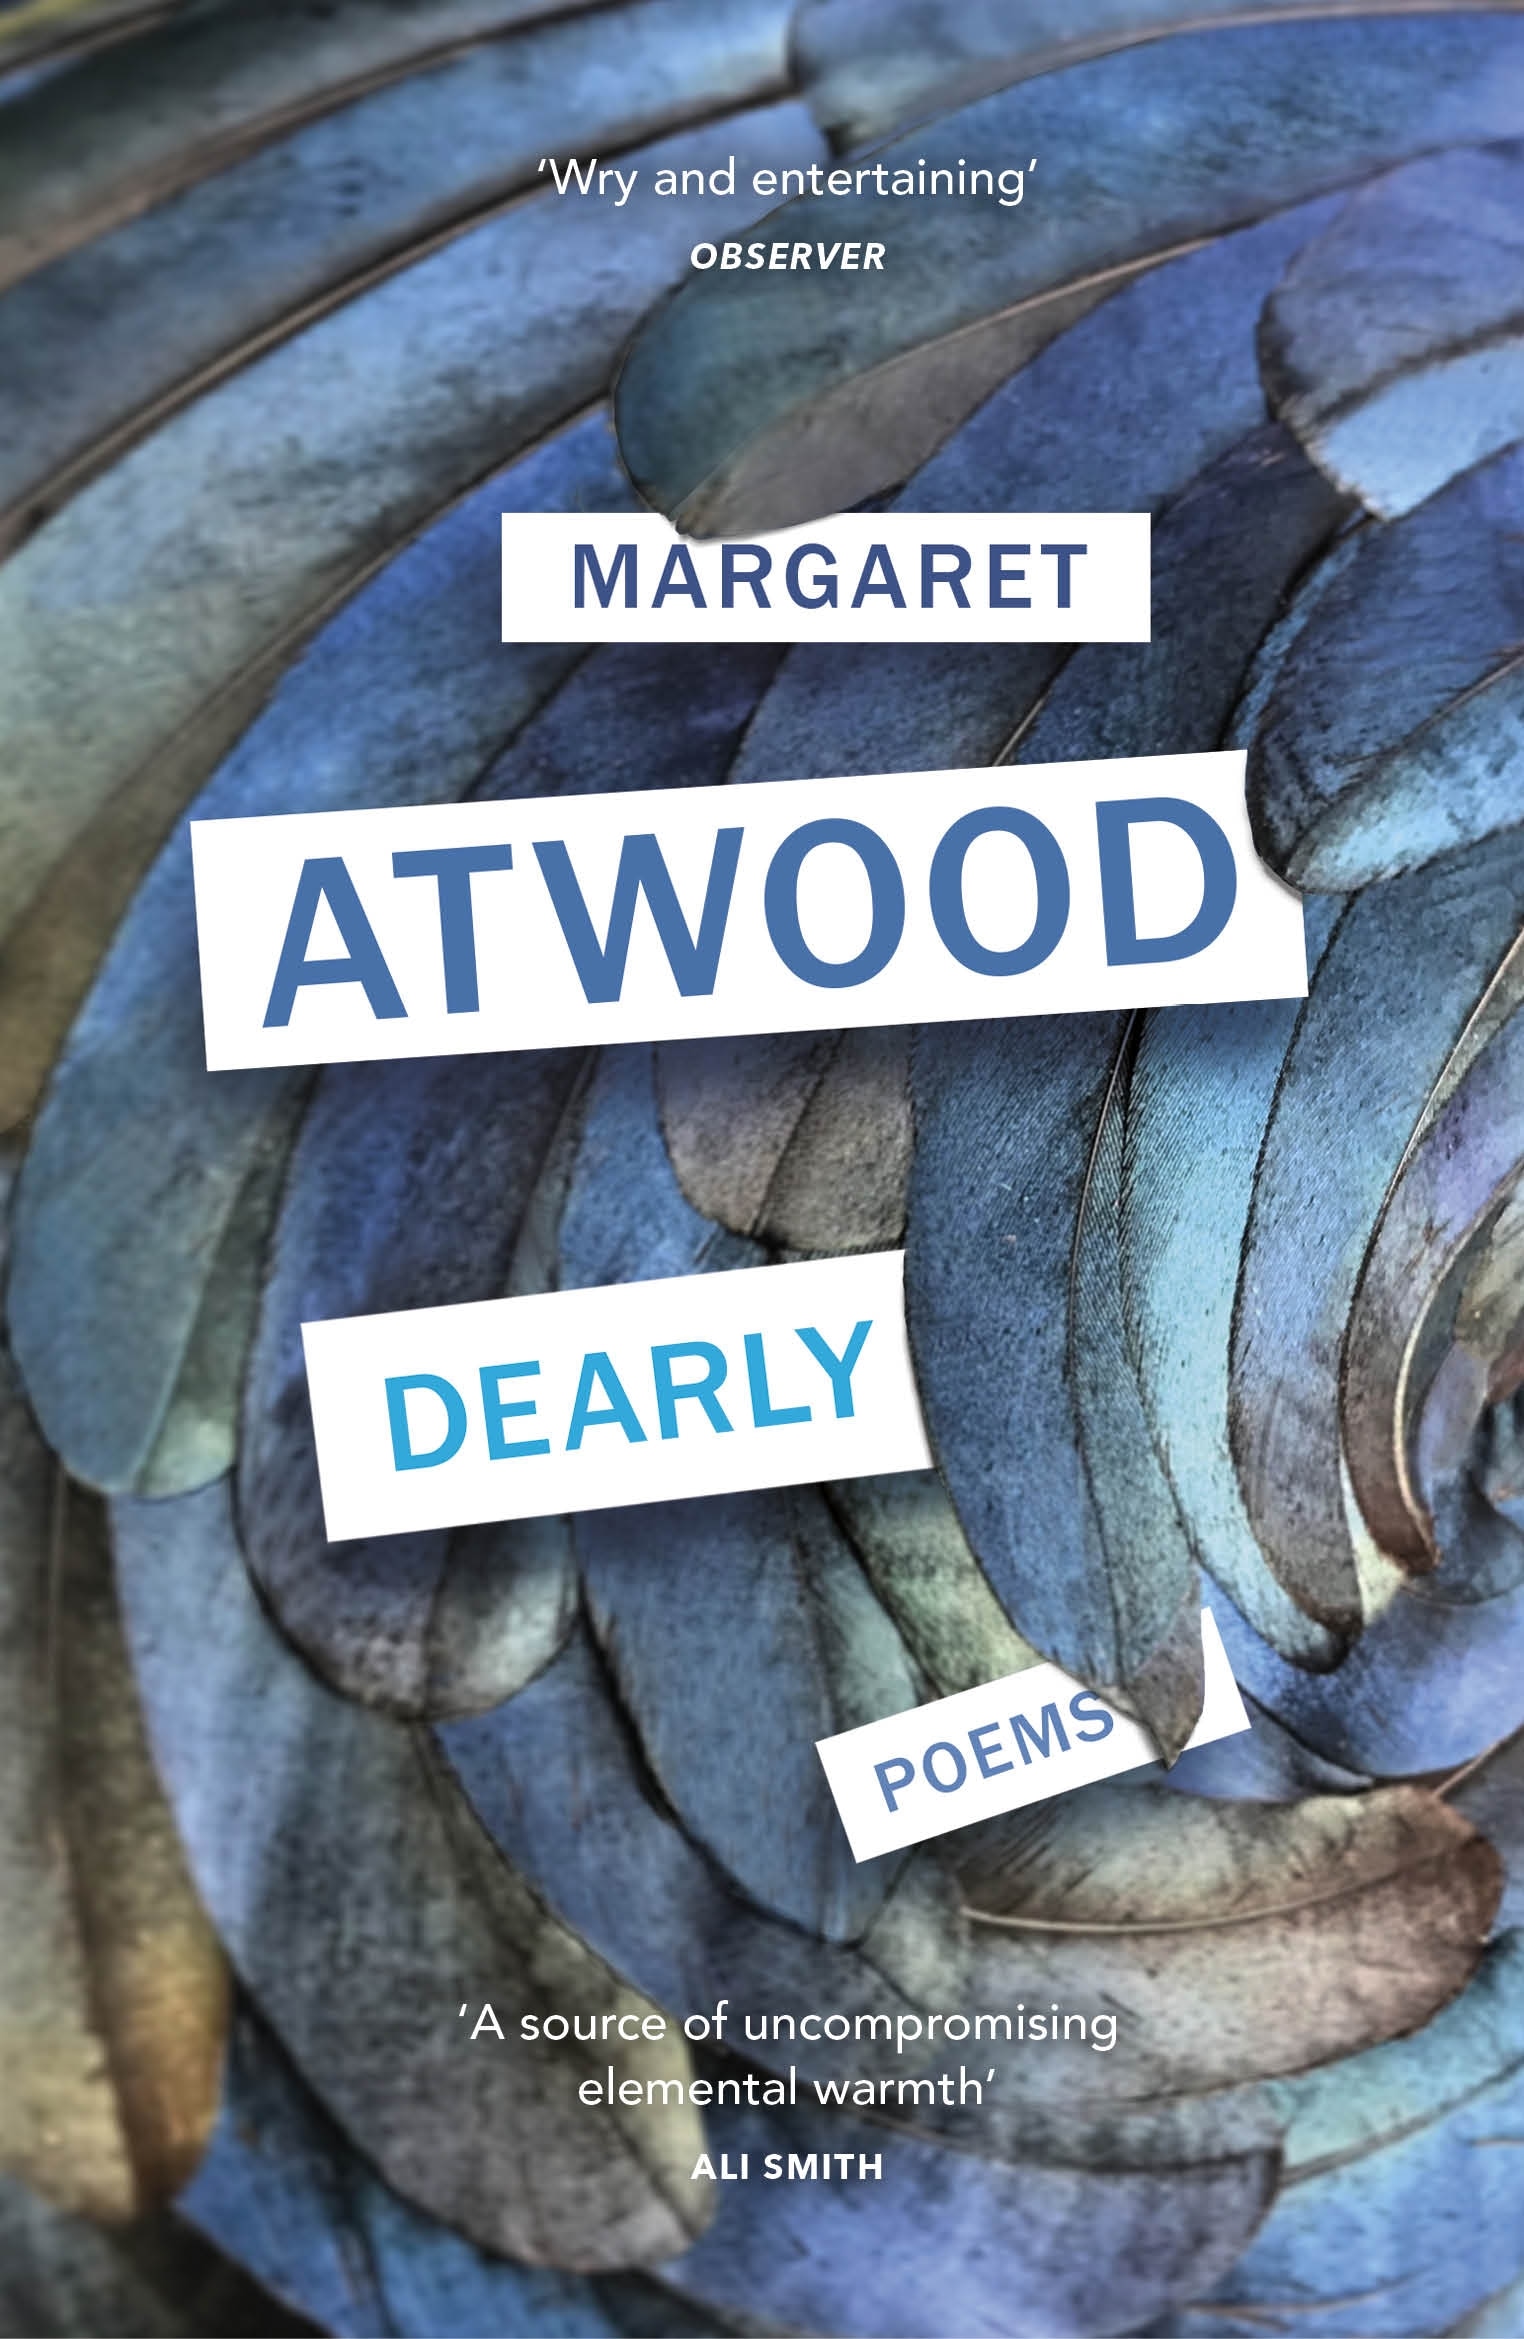 Book “Dearly” by Margaret Atwood — March 17, 2022